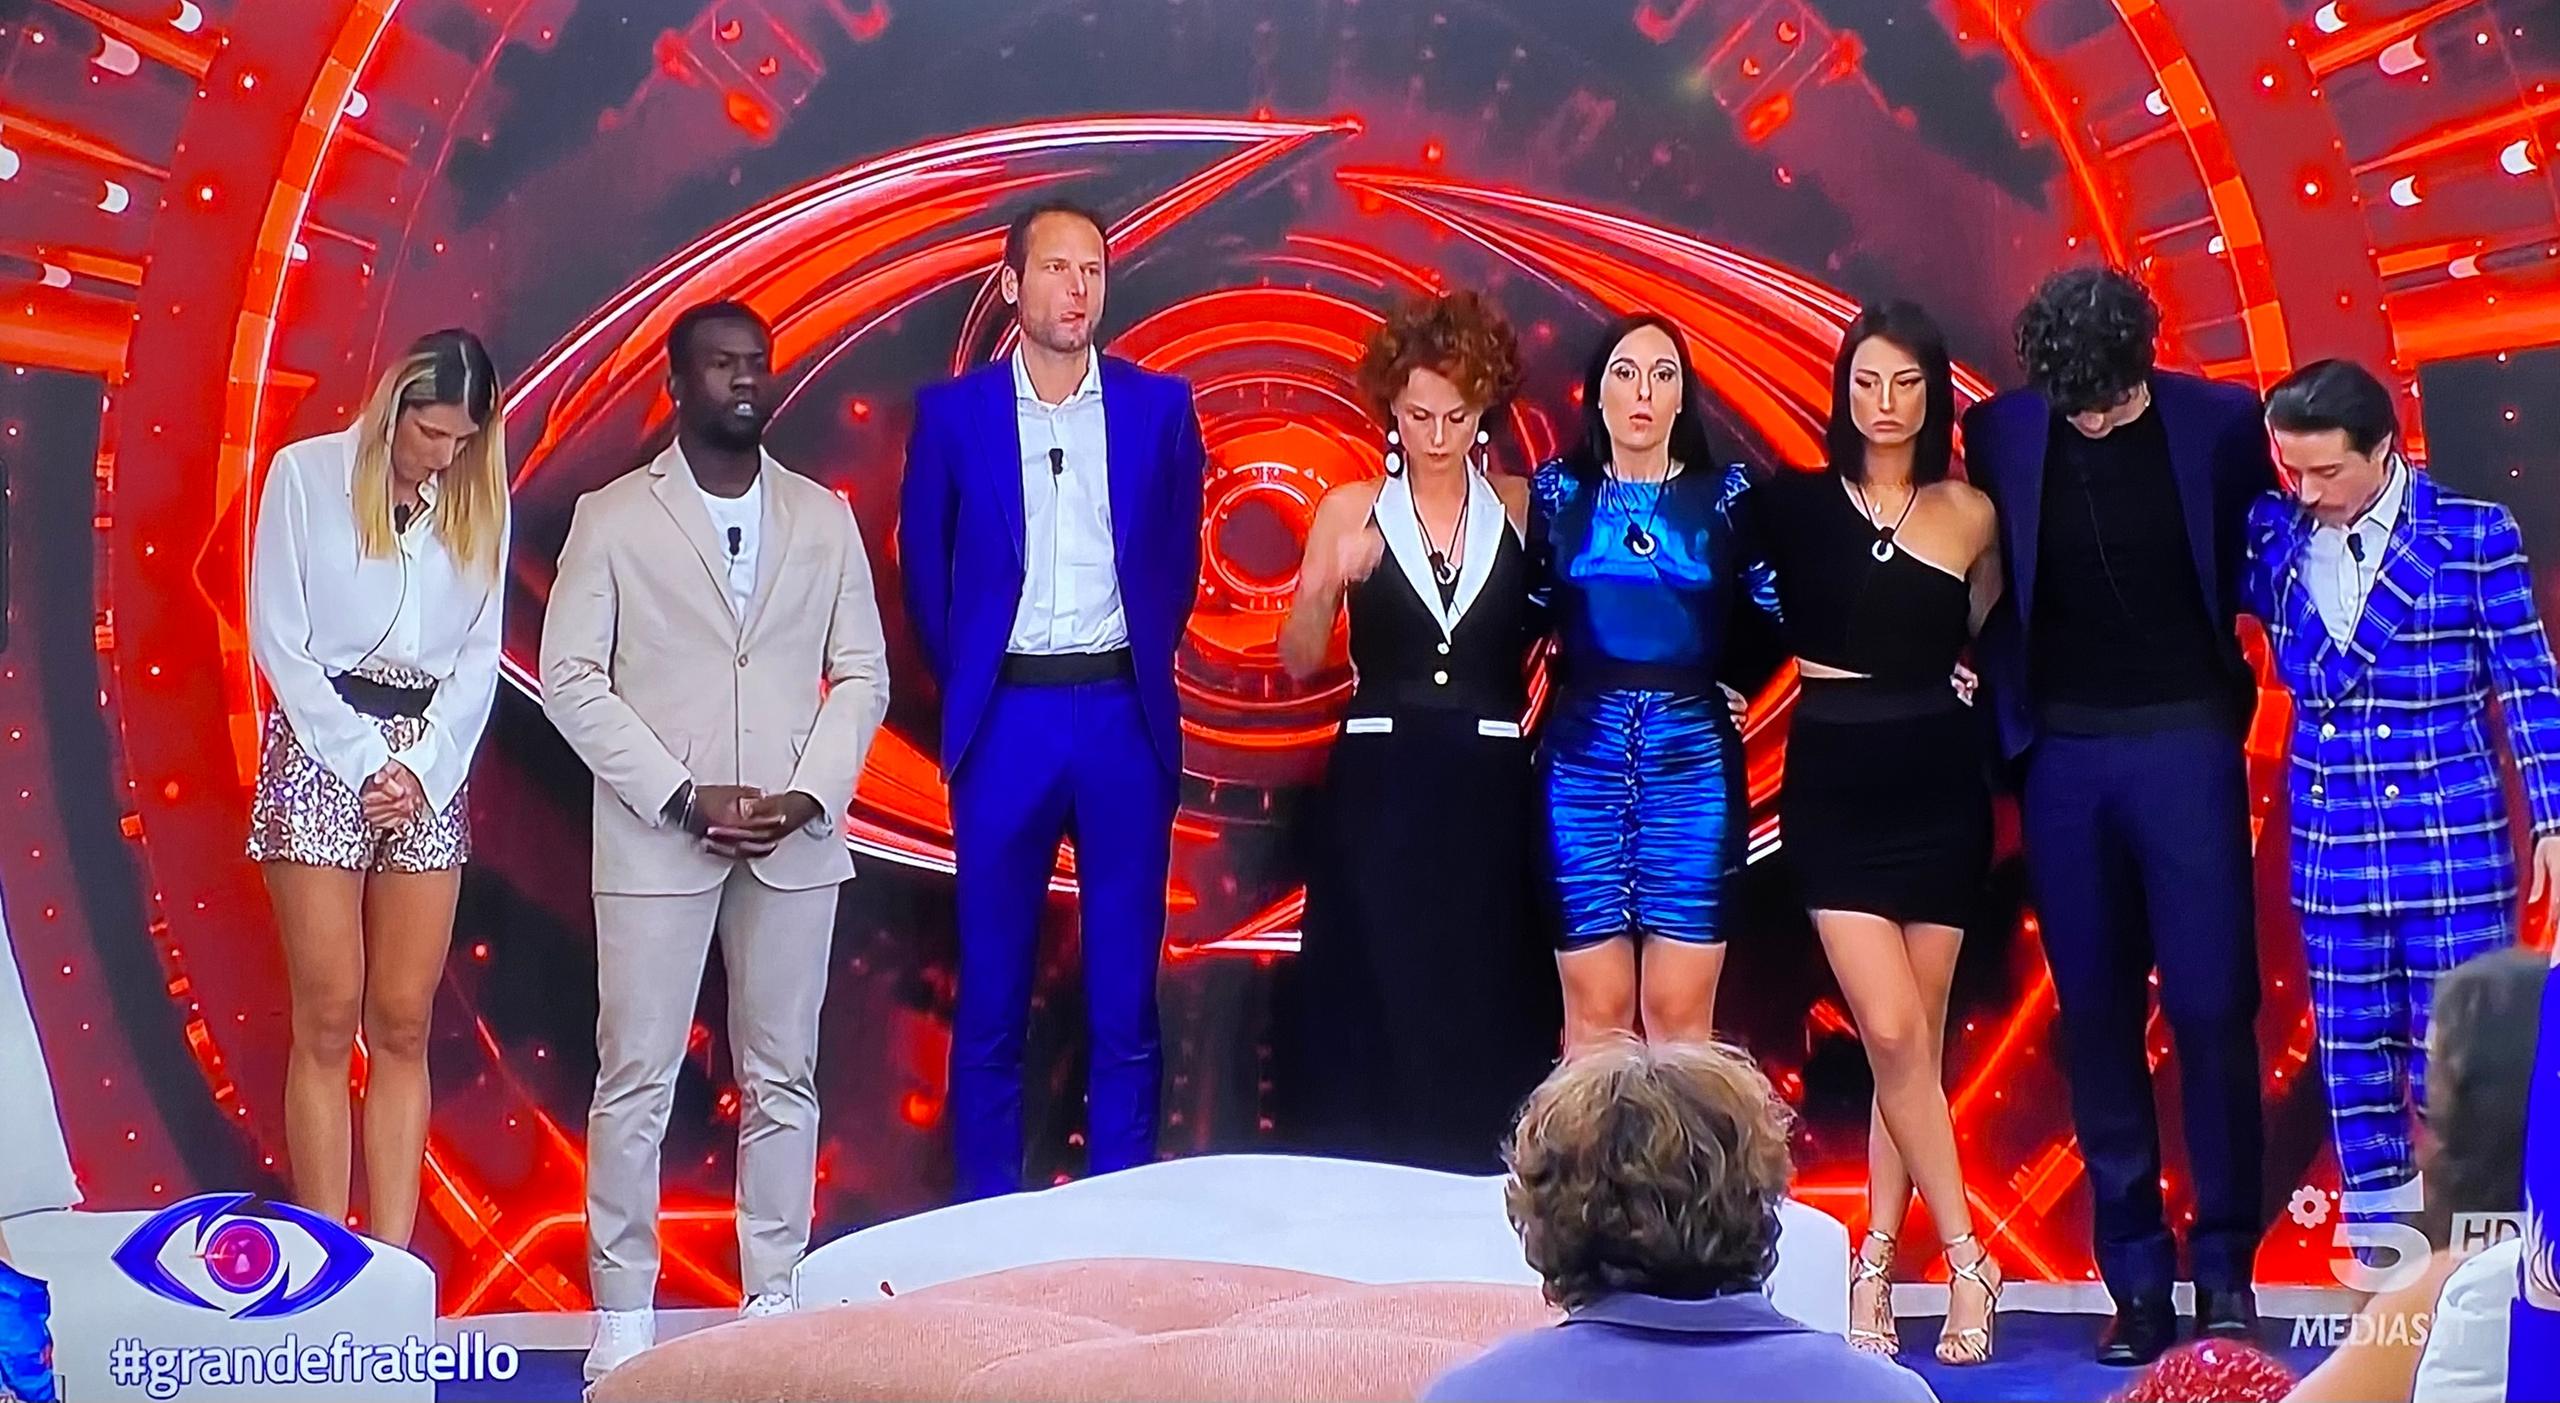 Big Brother October 5, candidates and those excluded from the House of Representatives.  Beatrice Luzzi is immune